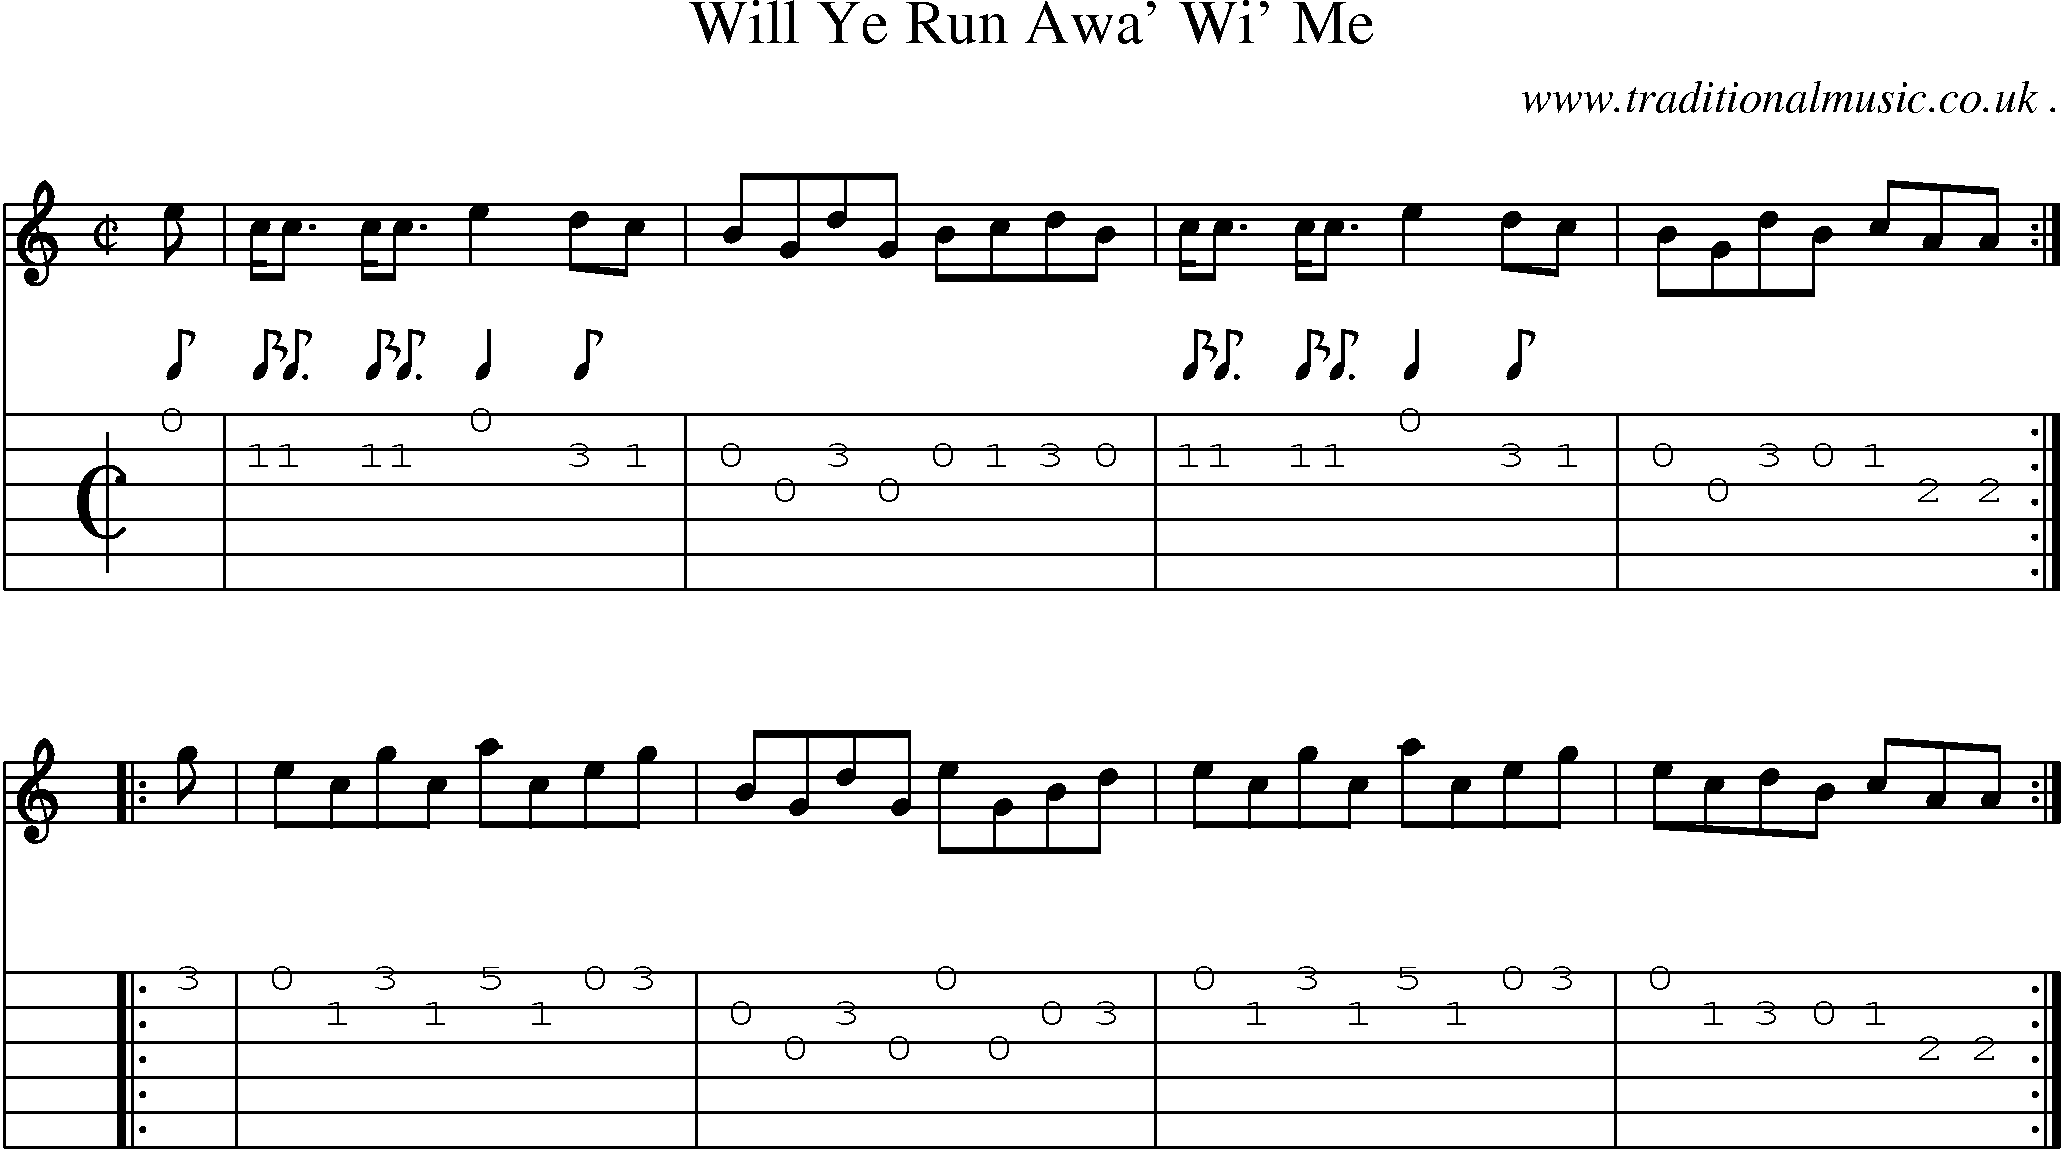 Sheet-music  score, Chords and Guitar Tabs for Will Ye Run Awa Wi Me